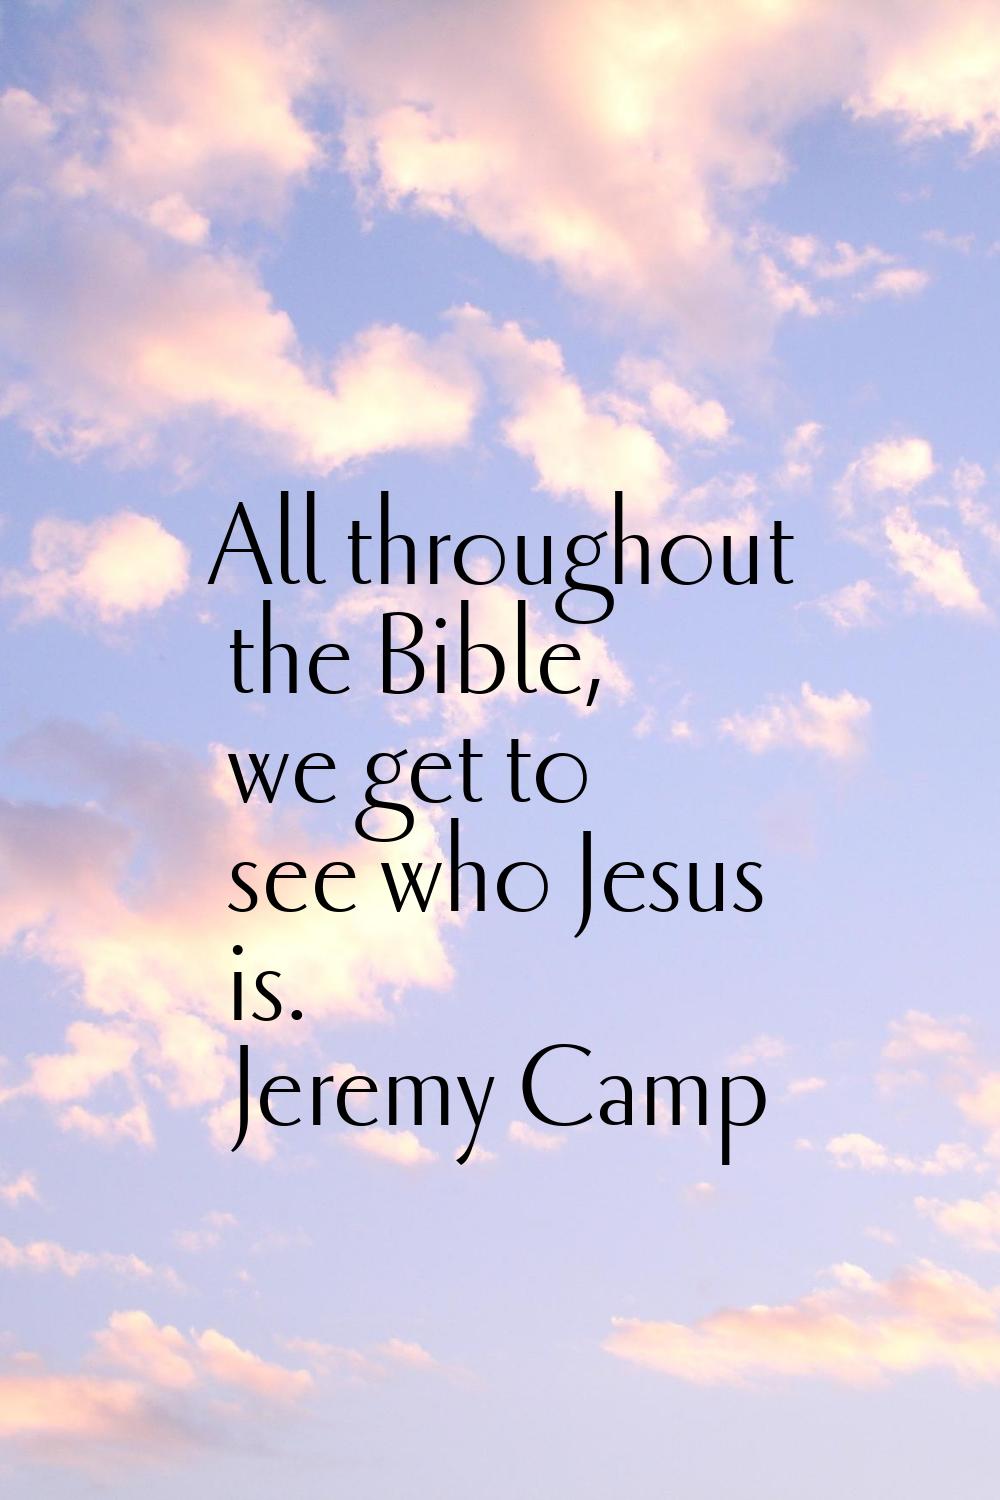 All throughout the Bible, we get to see who Jesus is.